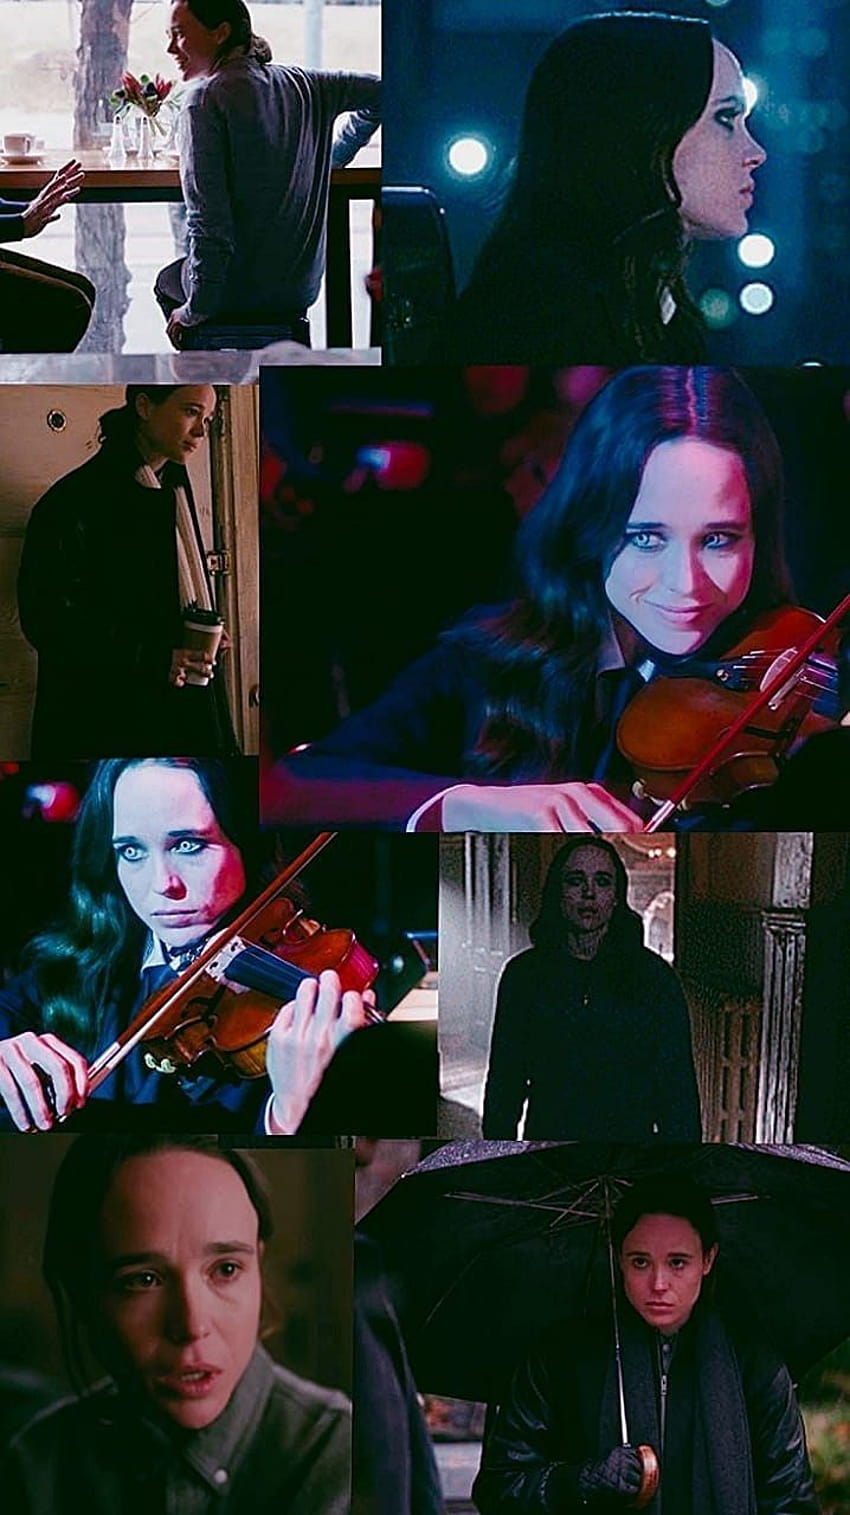 Vanya Hargreeves Number 7 The White Violin. When she smiled through the evil out of love for her sister HD phone wallpaper